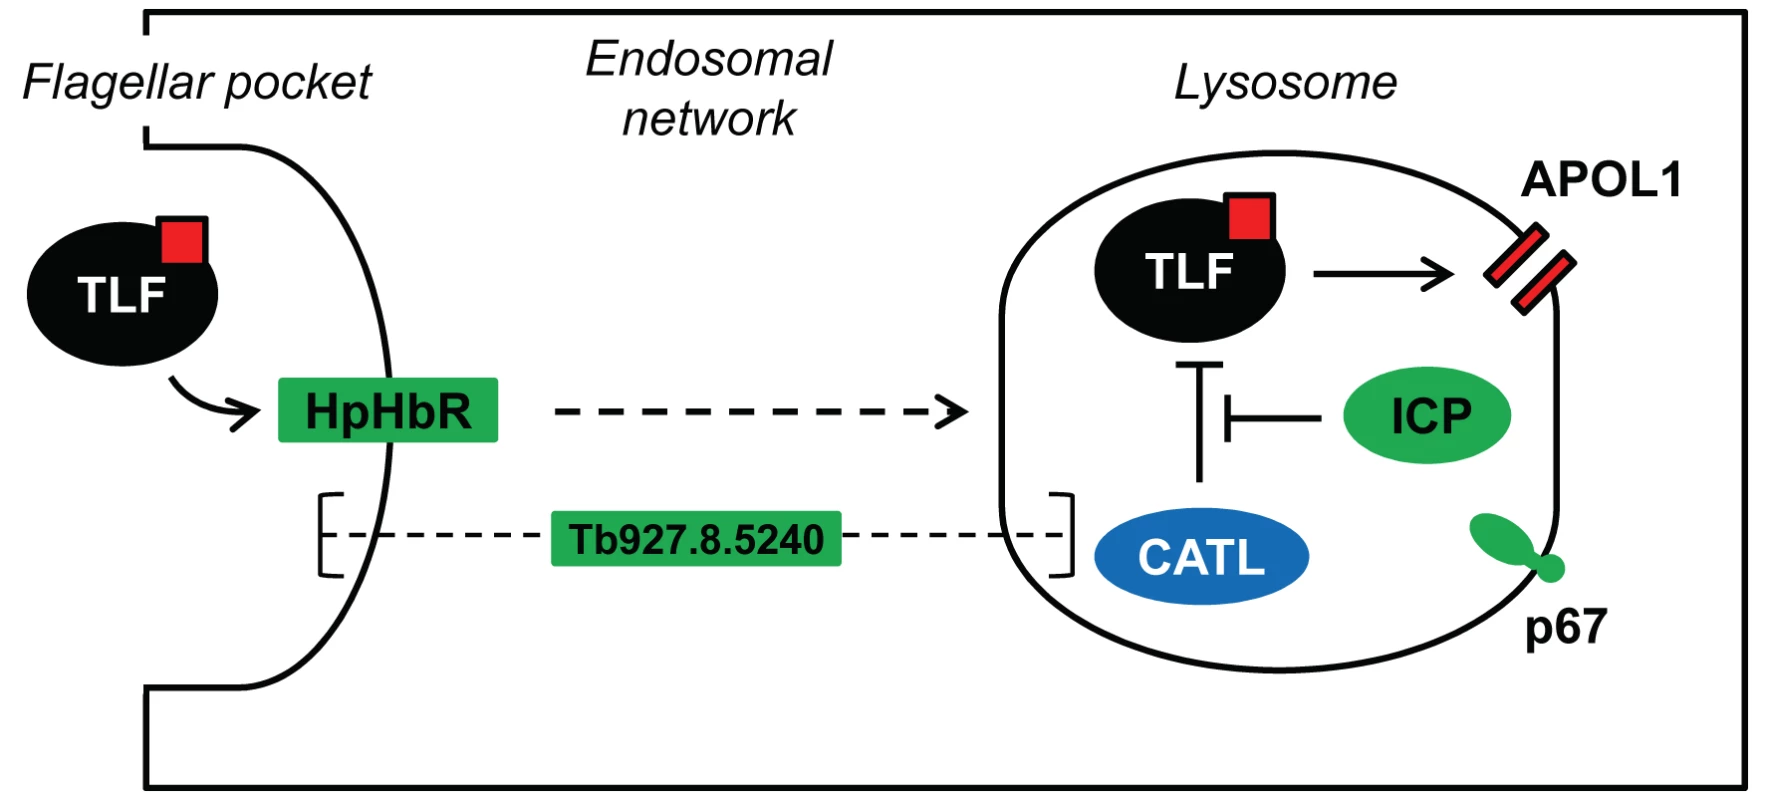 Model showing the proposed interactions among ICP, CATL and TLF.